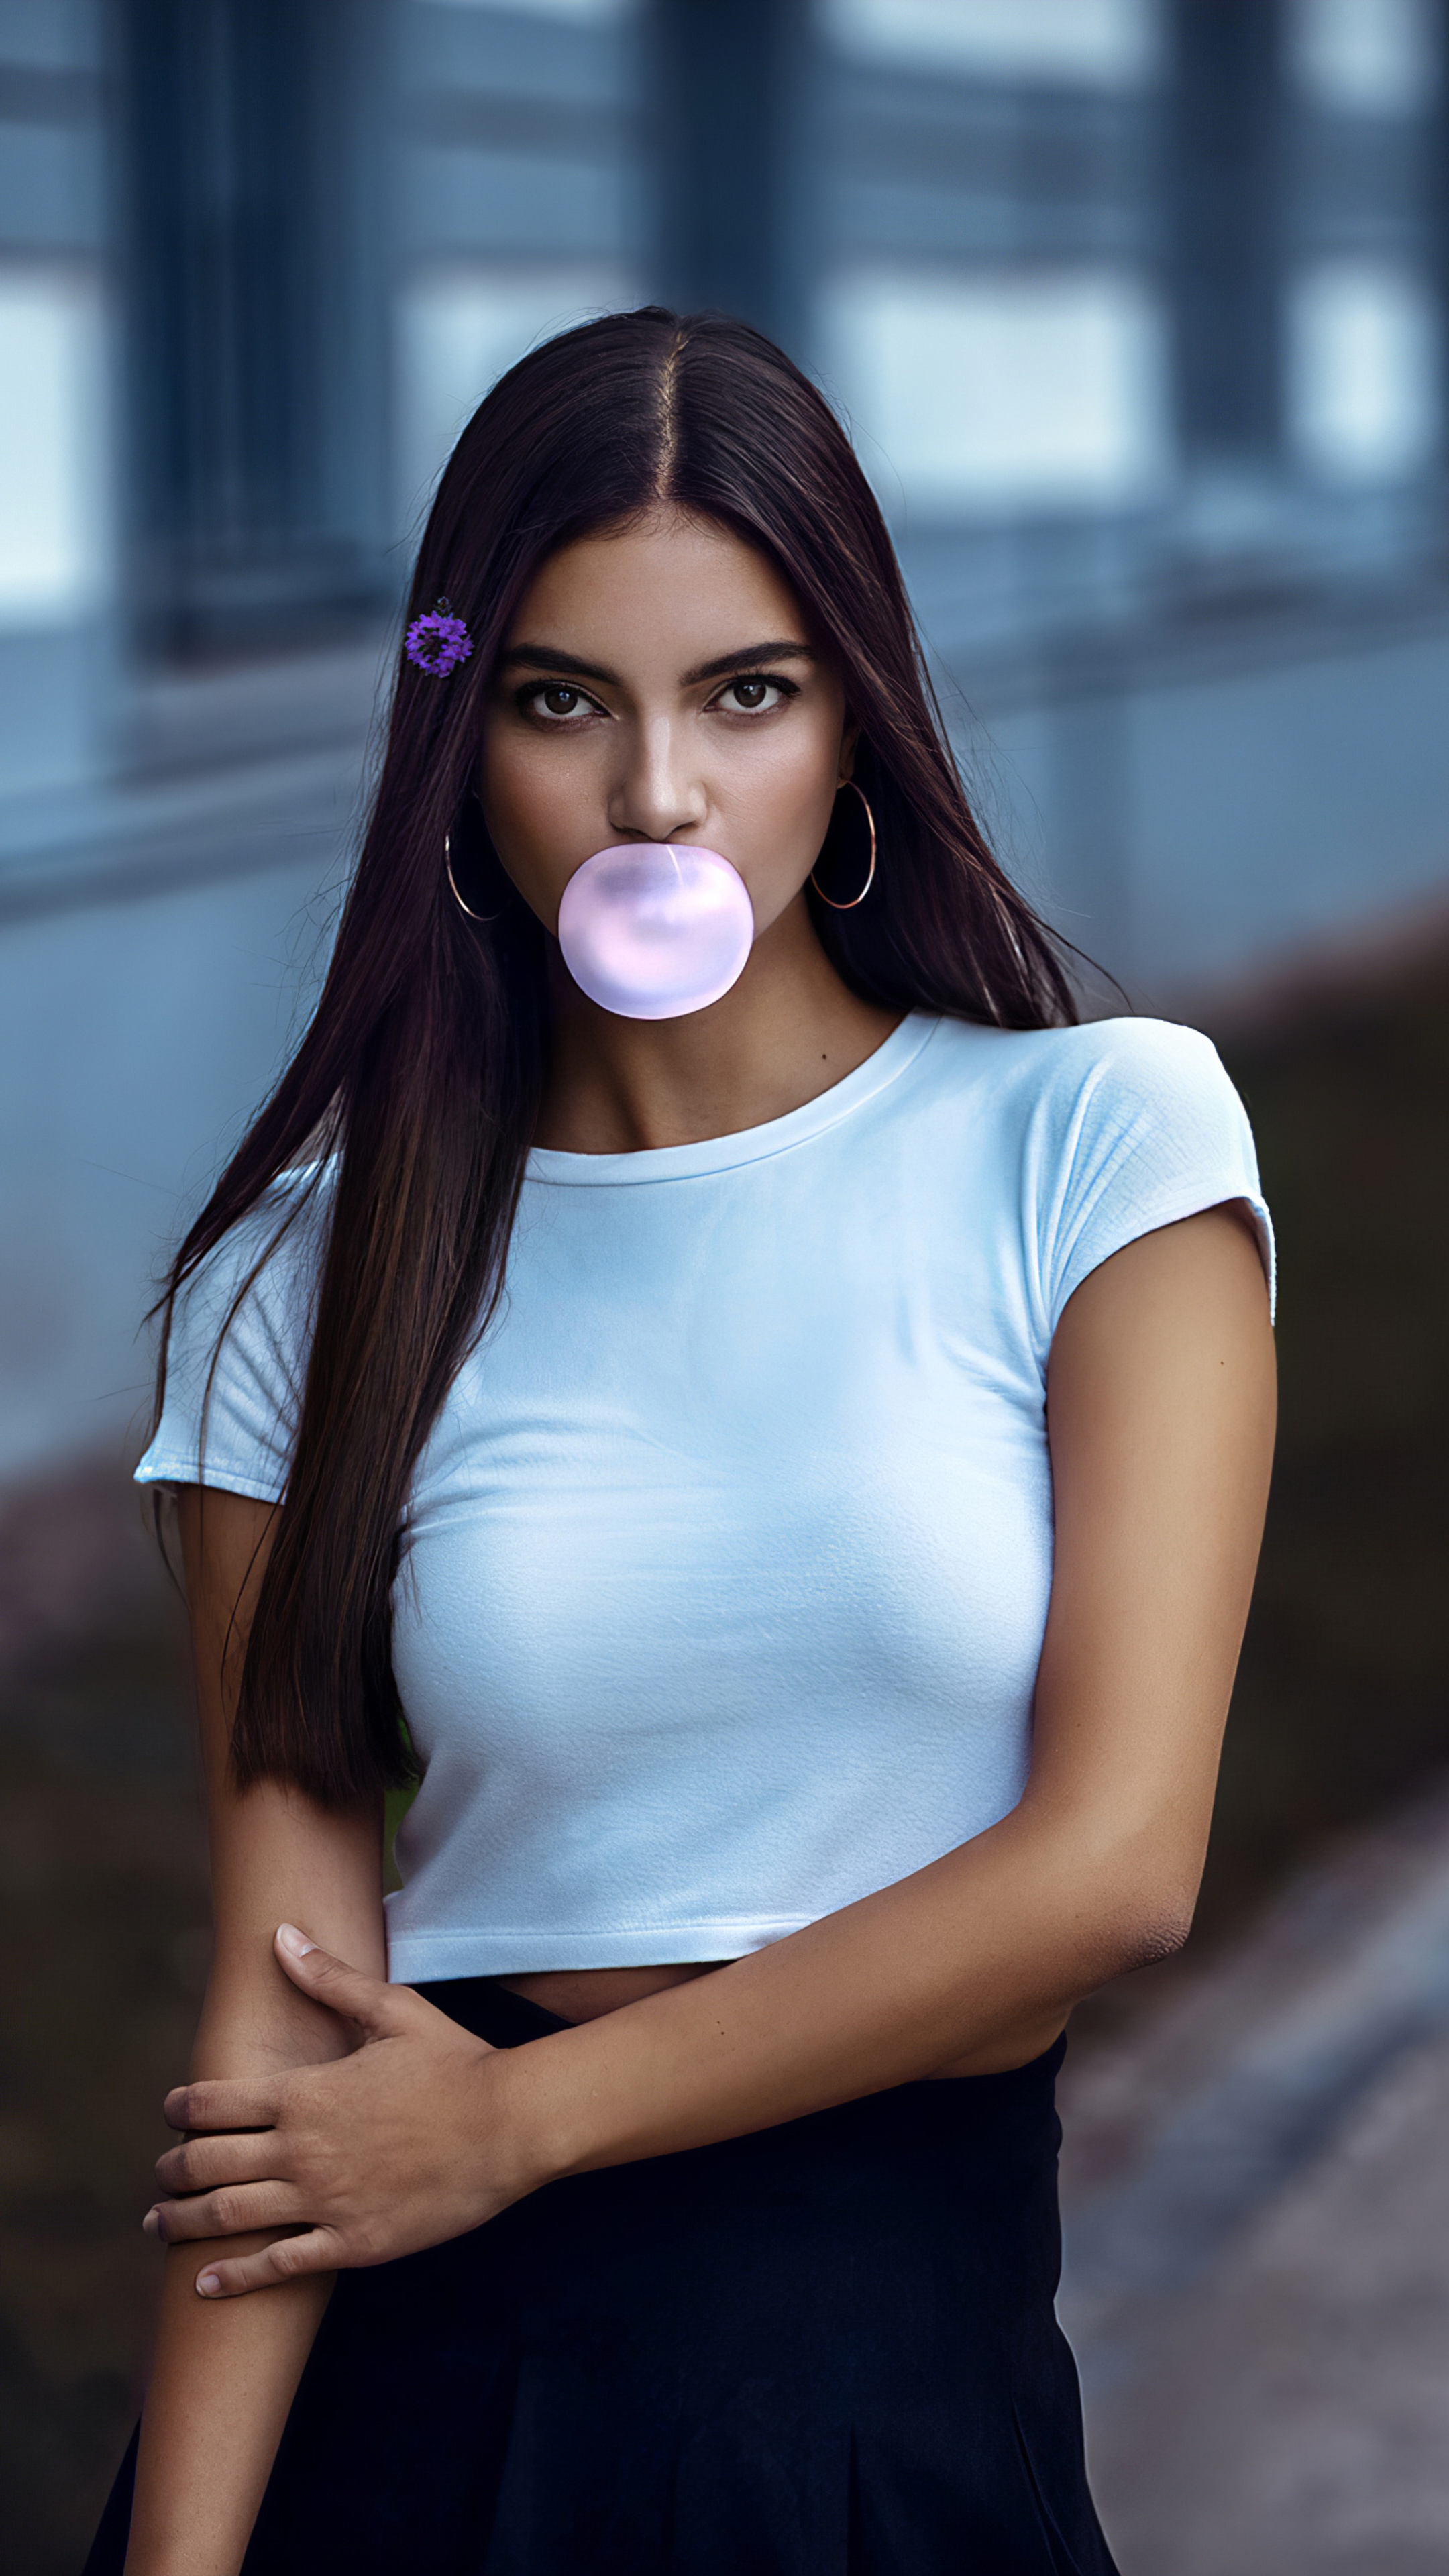 Young girl blowing bubble gum, Innocent and playful, Bubble-blowing delight, Carefree enjoyment, 2160x3840 4K Handy